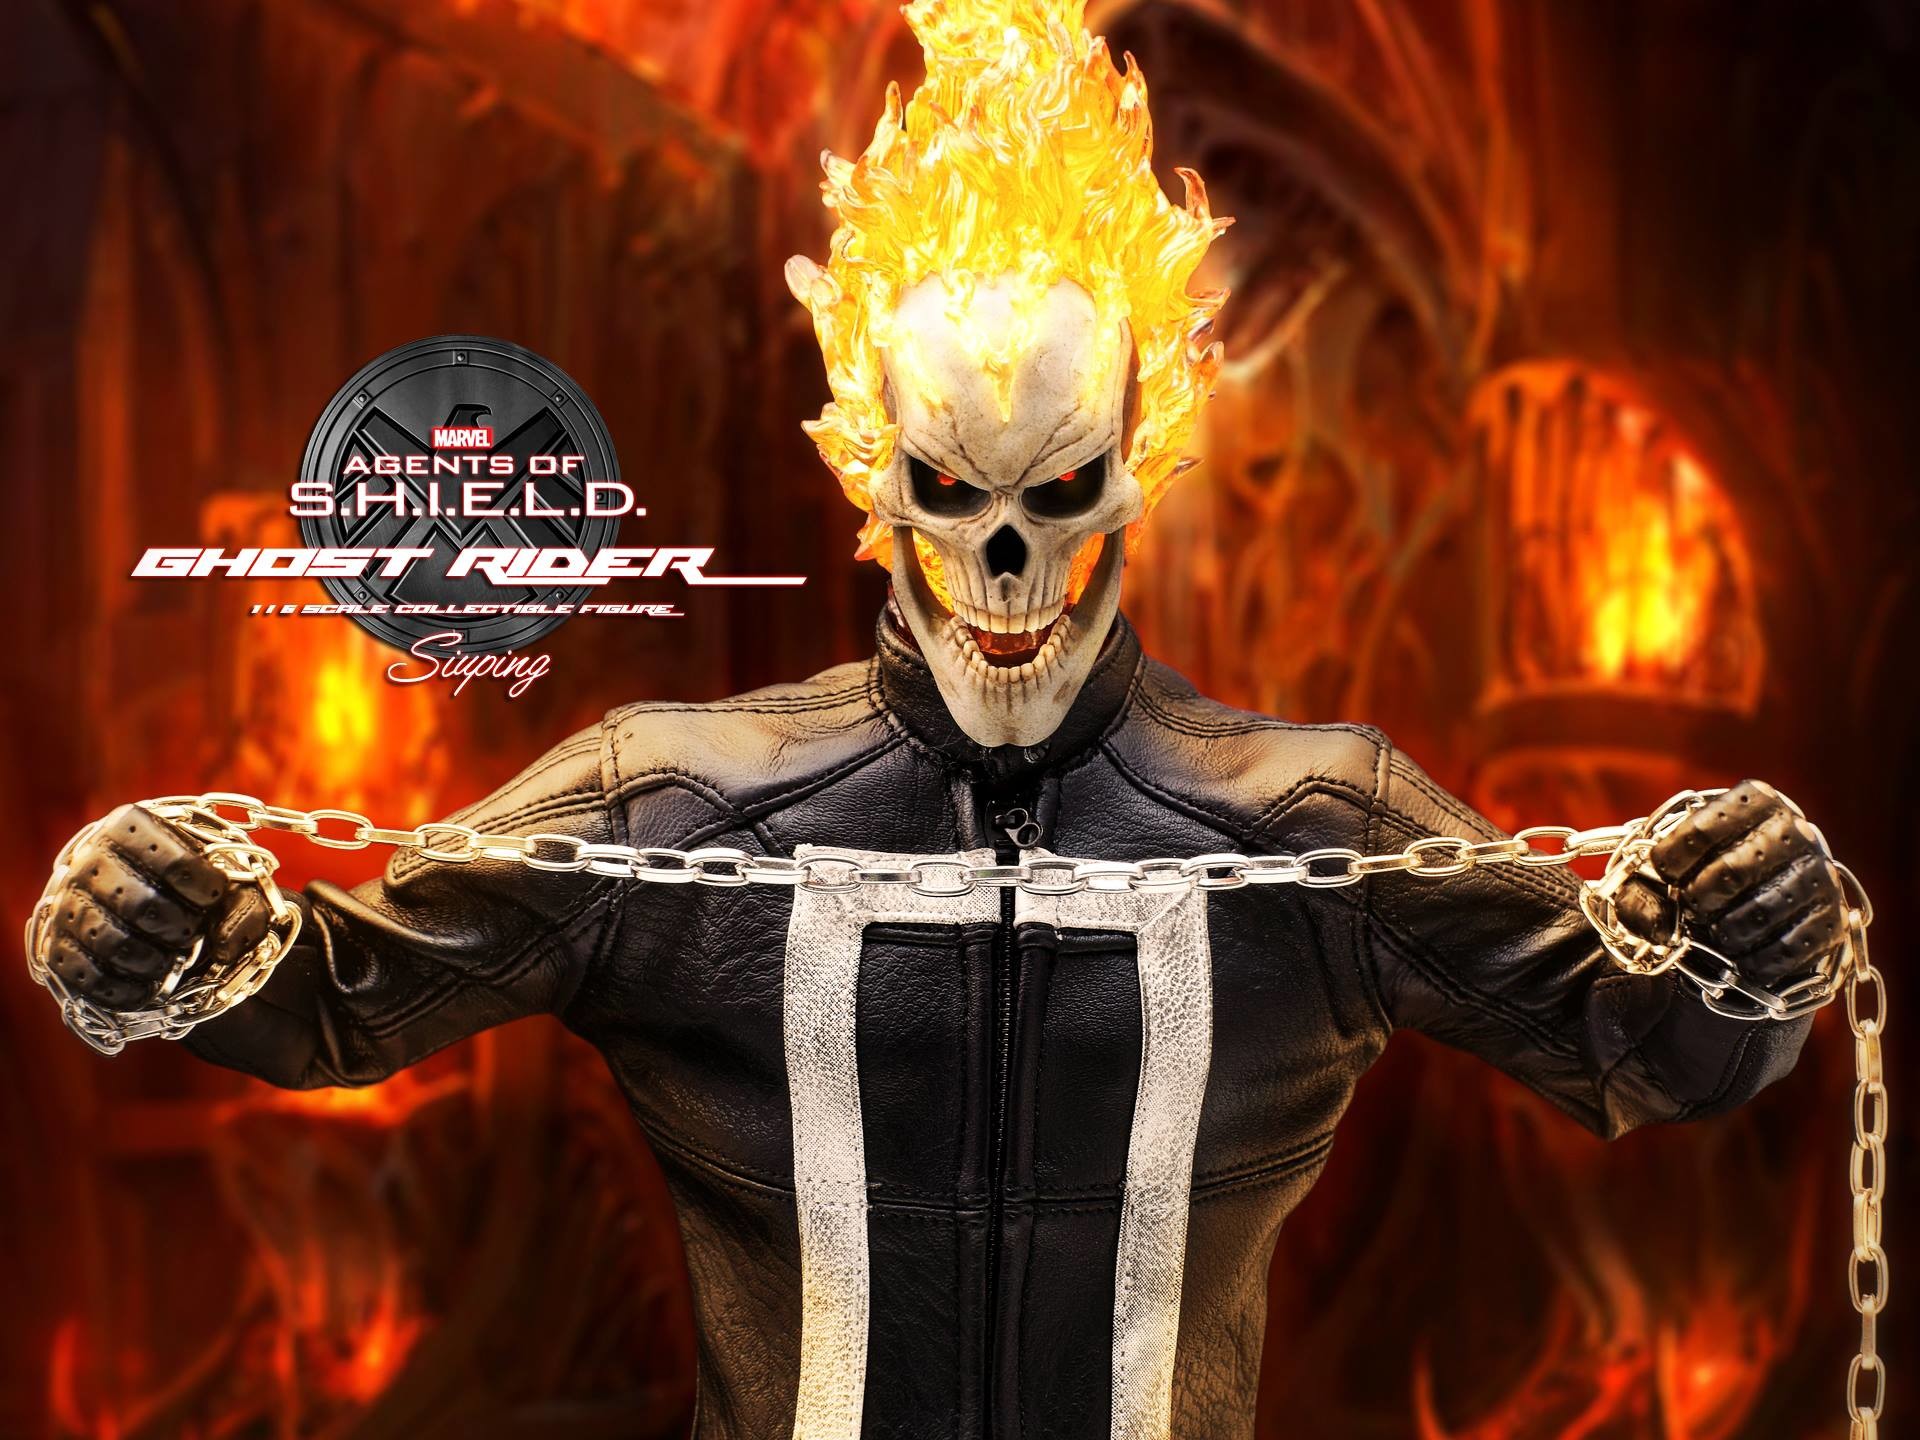 Hot Toys Agents of S.H.I.E.L.D. Ghost Rider Final Promo Images Hot Toys Agents Of S H I E L D Ghost Rider Final Promo Images